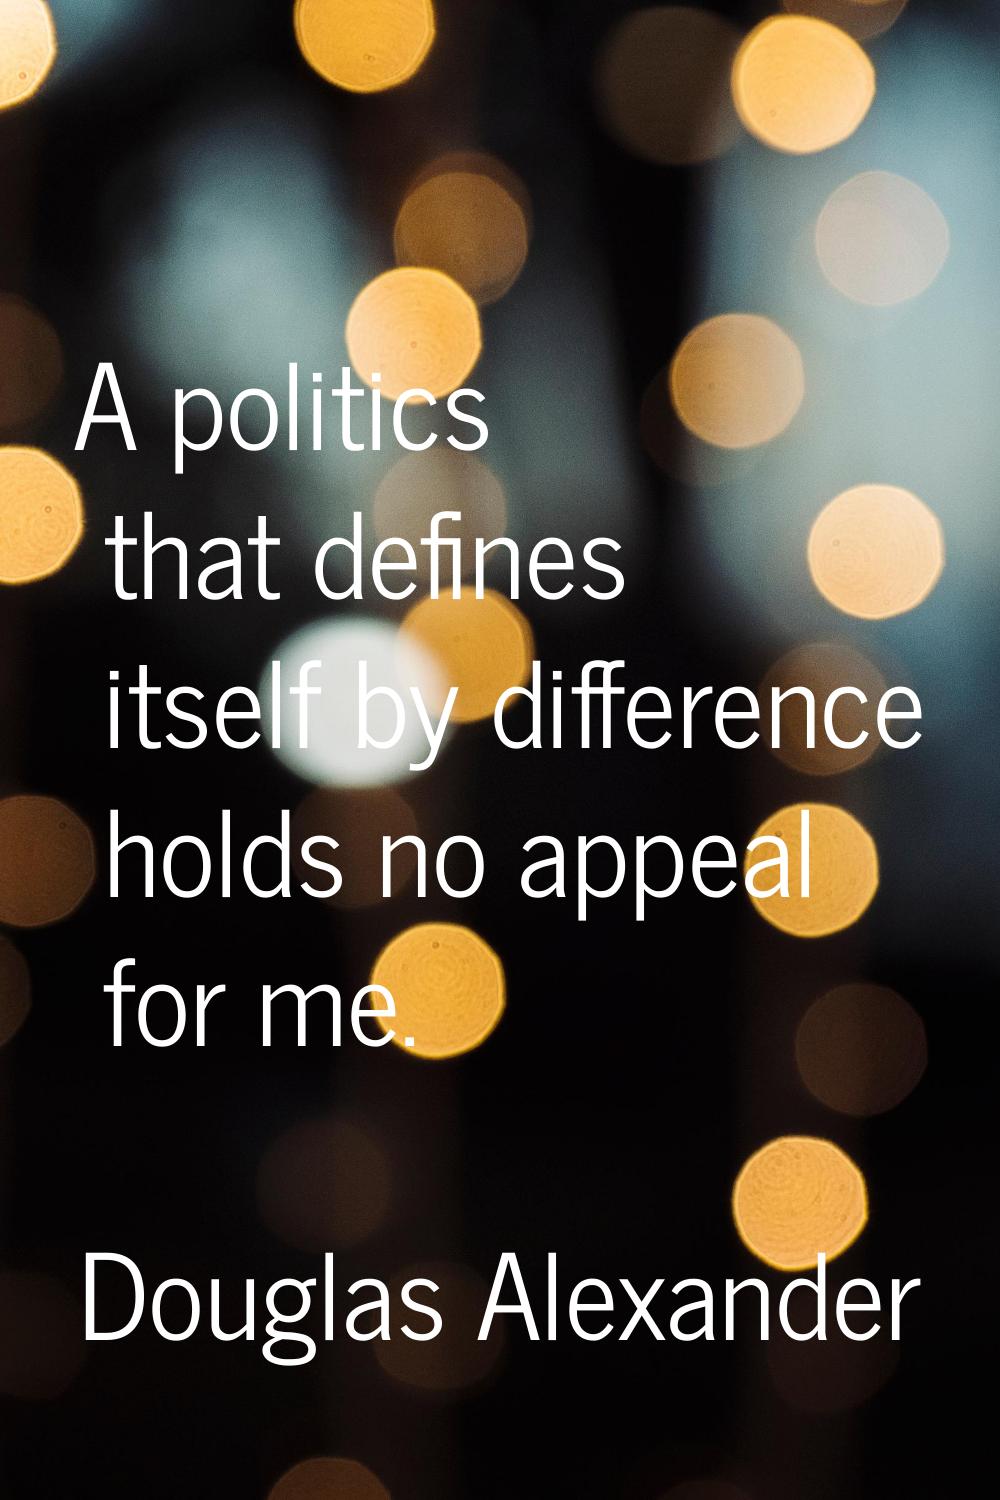 A politics that defines itself by difference holds no appeal for me.